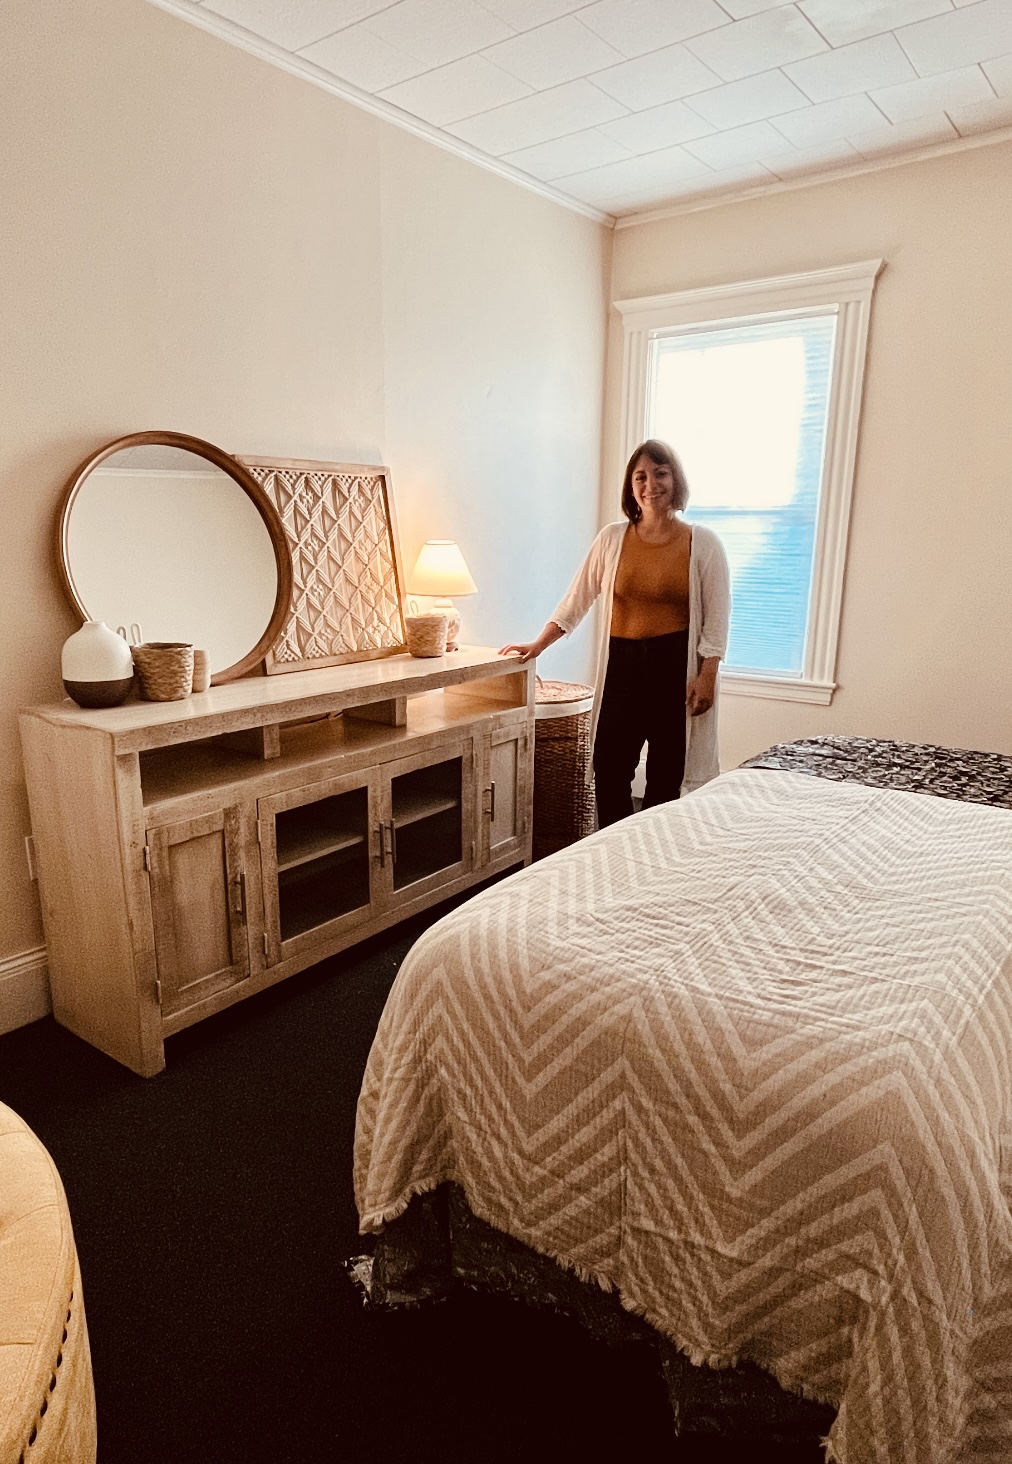 Bloom Therapeutic Massage 321 W Main St Rear Suite, Searsport Maine 04974